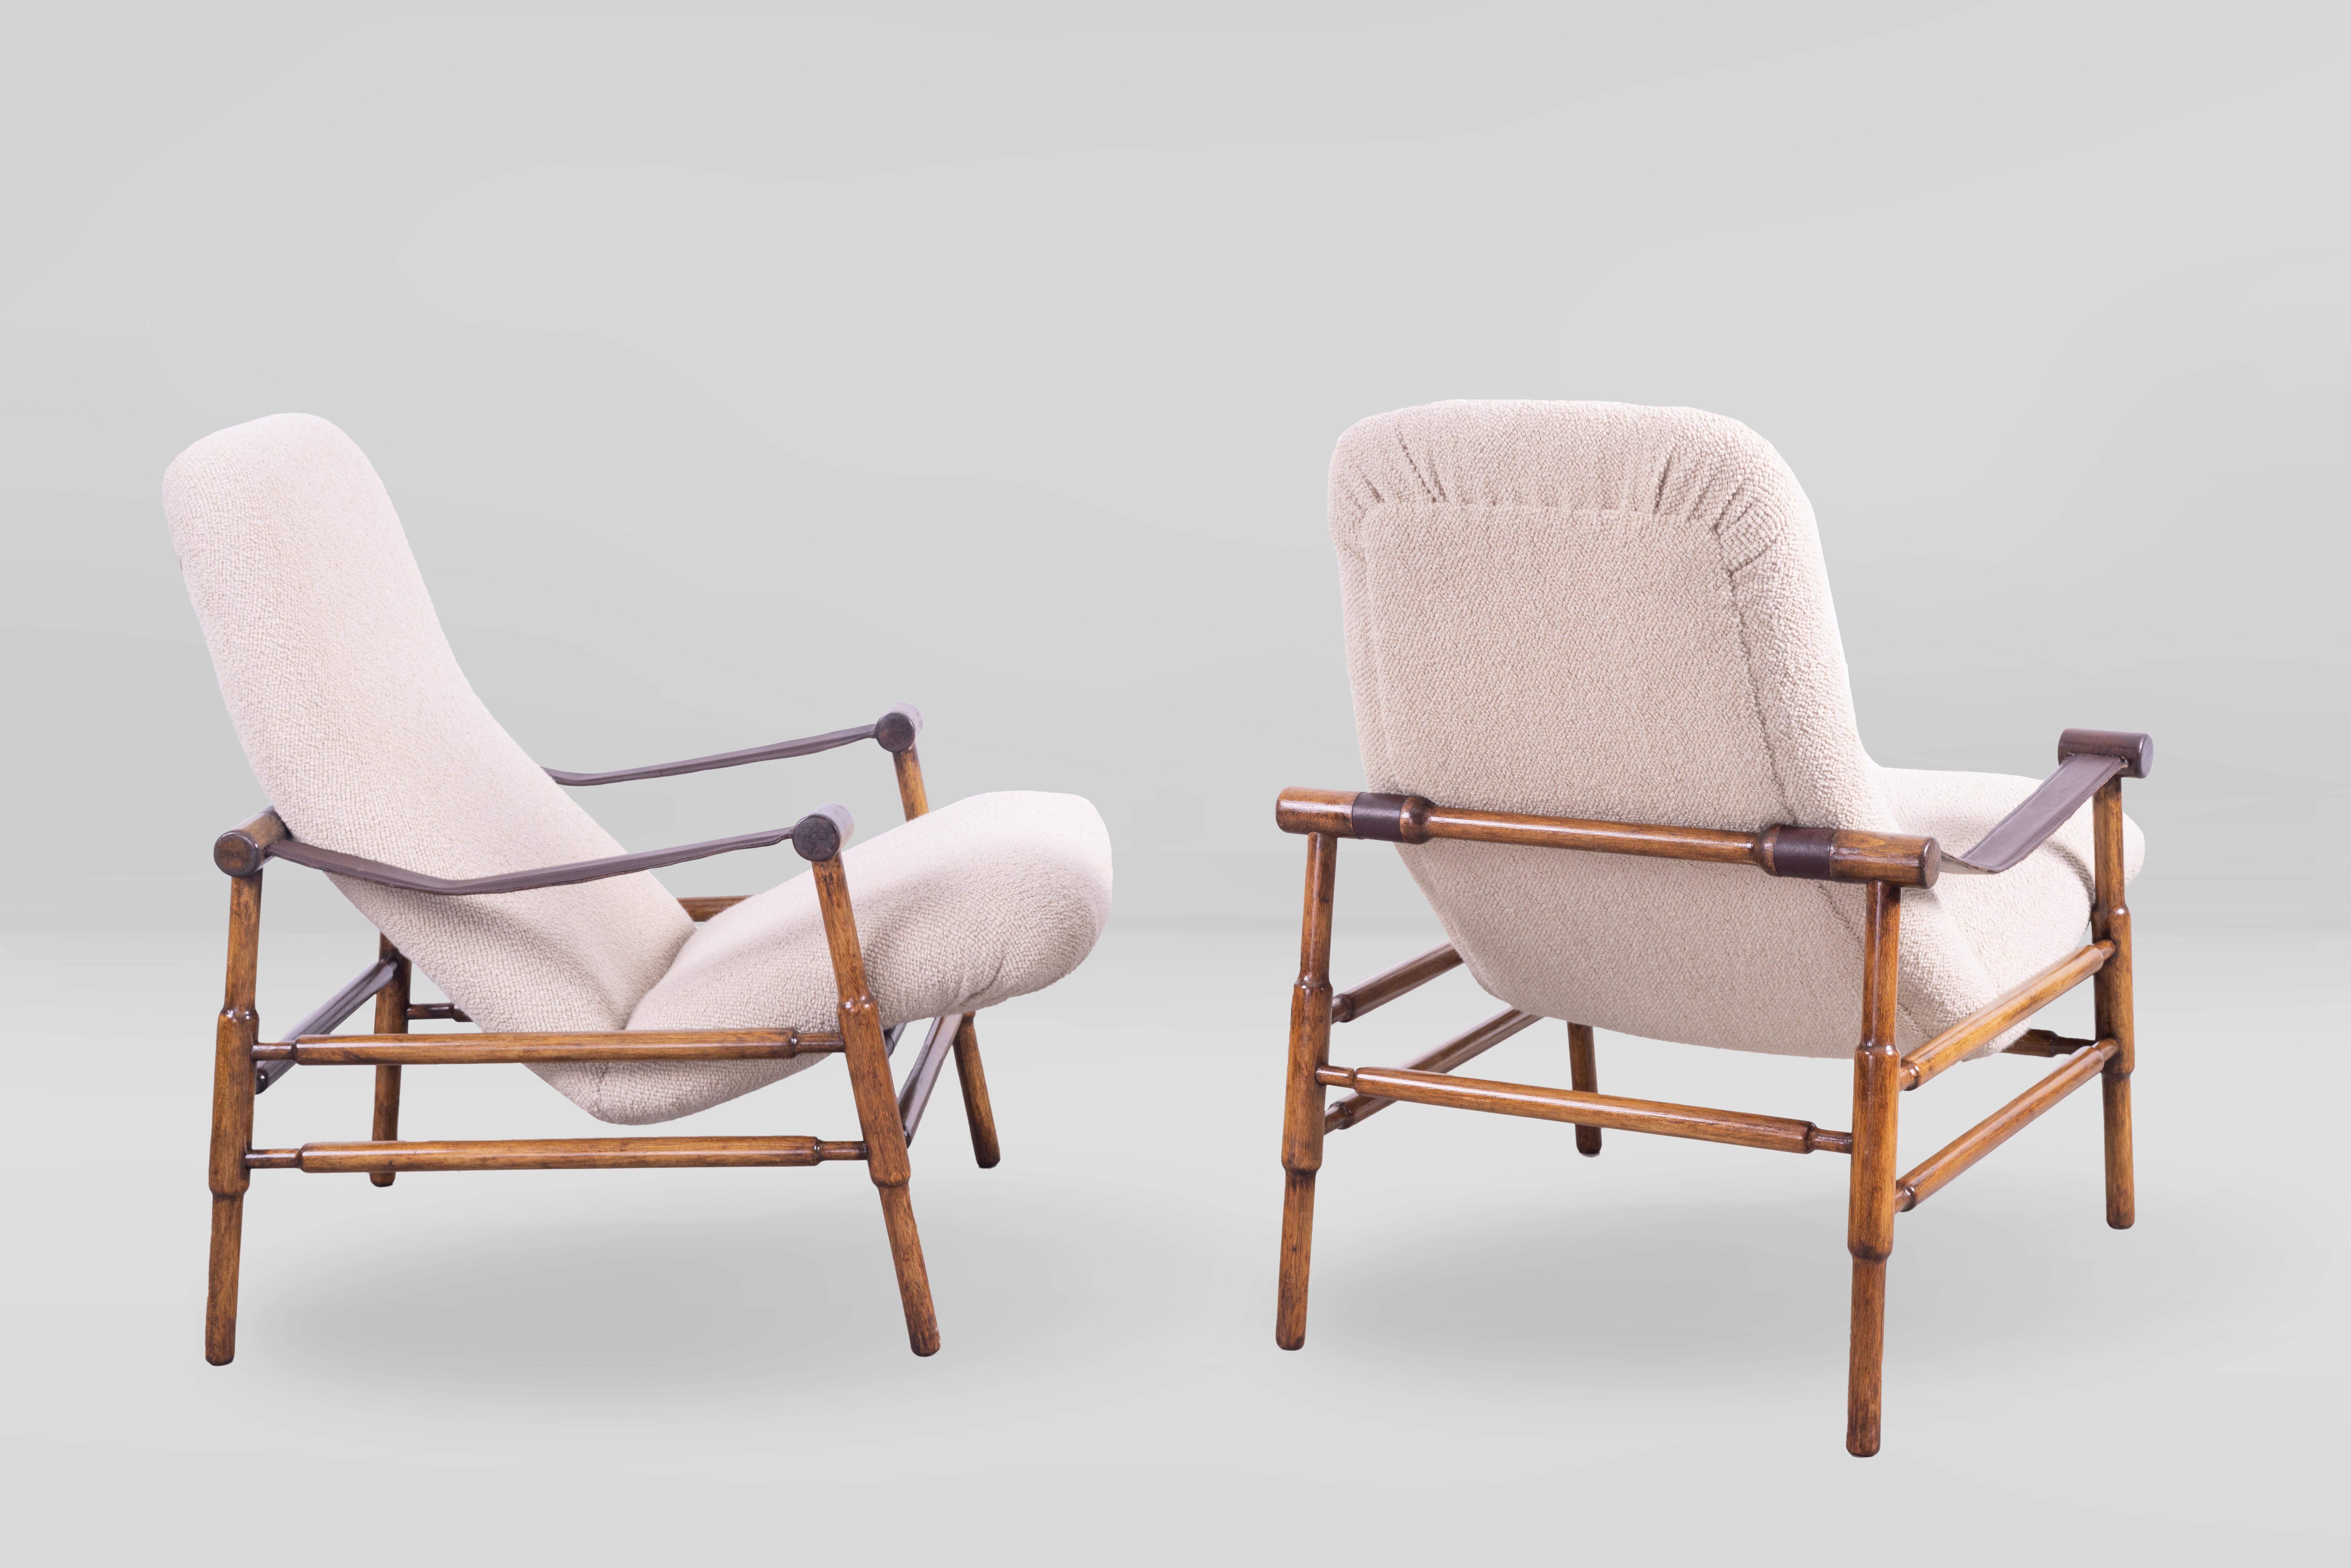 Pair of armchairs, Italy 60s, structure in walnut wood, armrests in iron foil covered in leather, reupholstered in beige Larson wool boucle' (Margo).